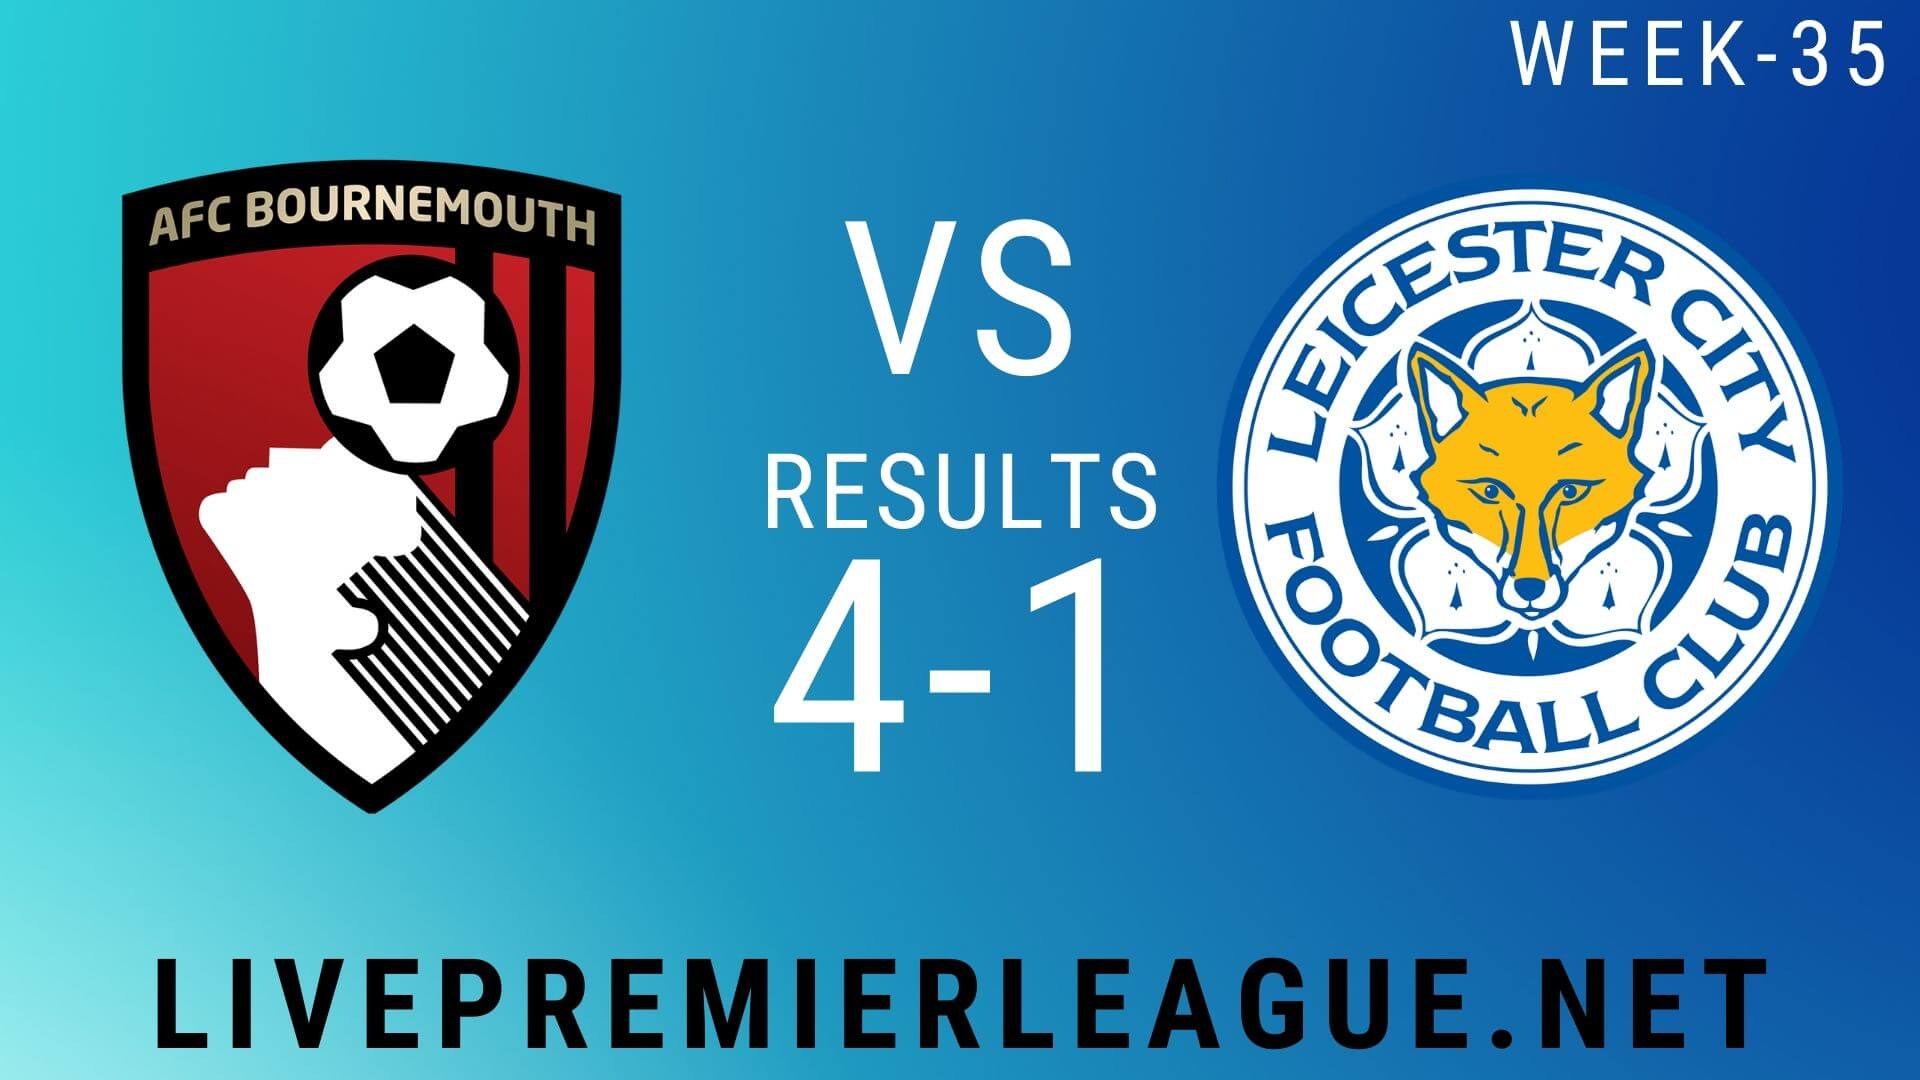 AFC Bournemouth Vs Leicester City | Week 35 Result 2020